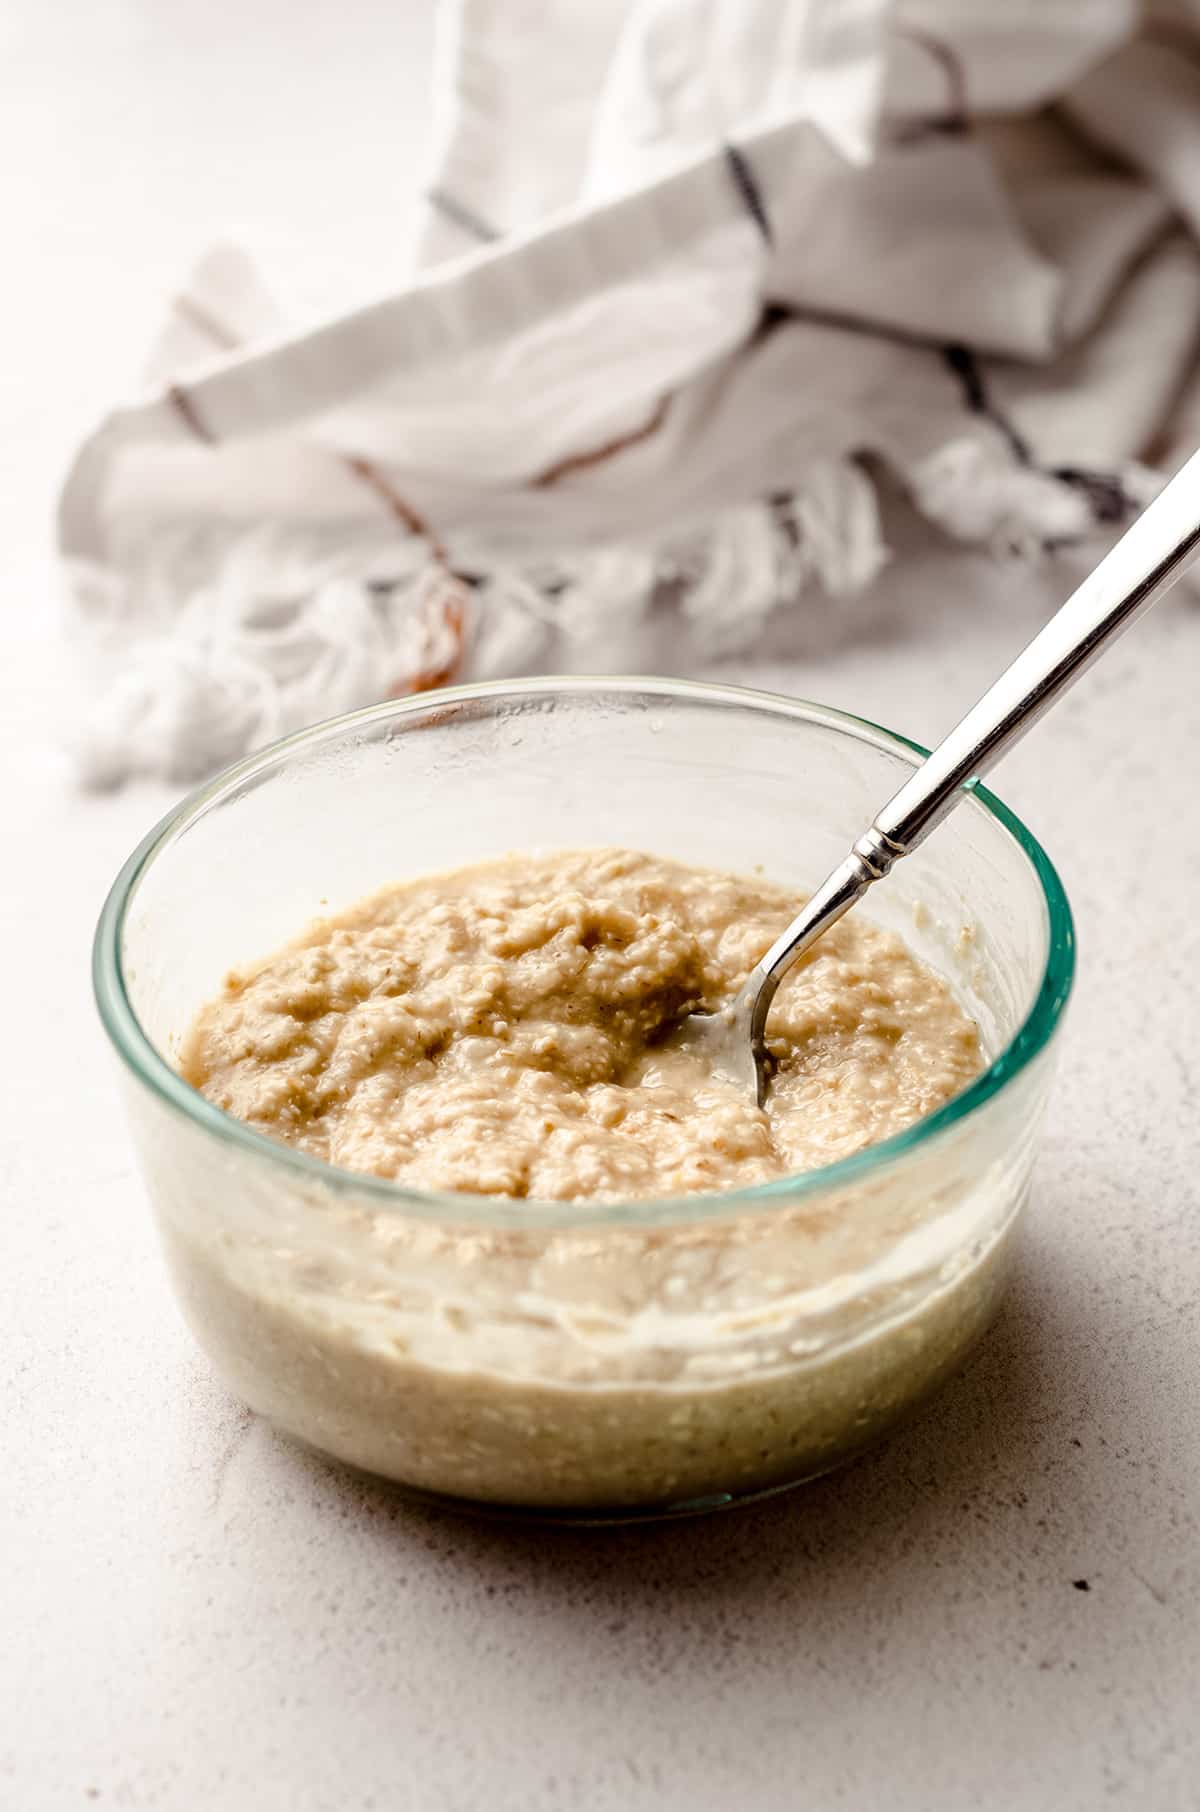 A bowl of prepared oatmeal with a spoon in the bowl.